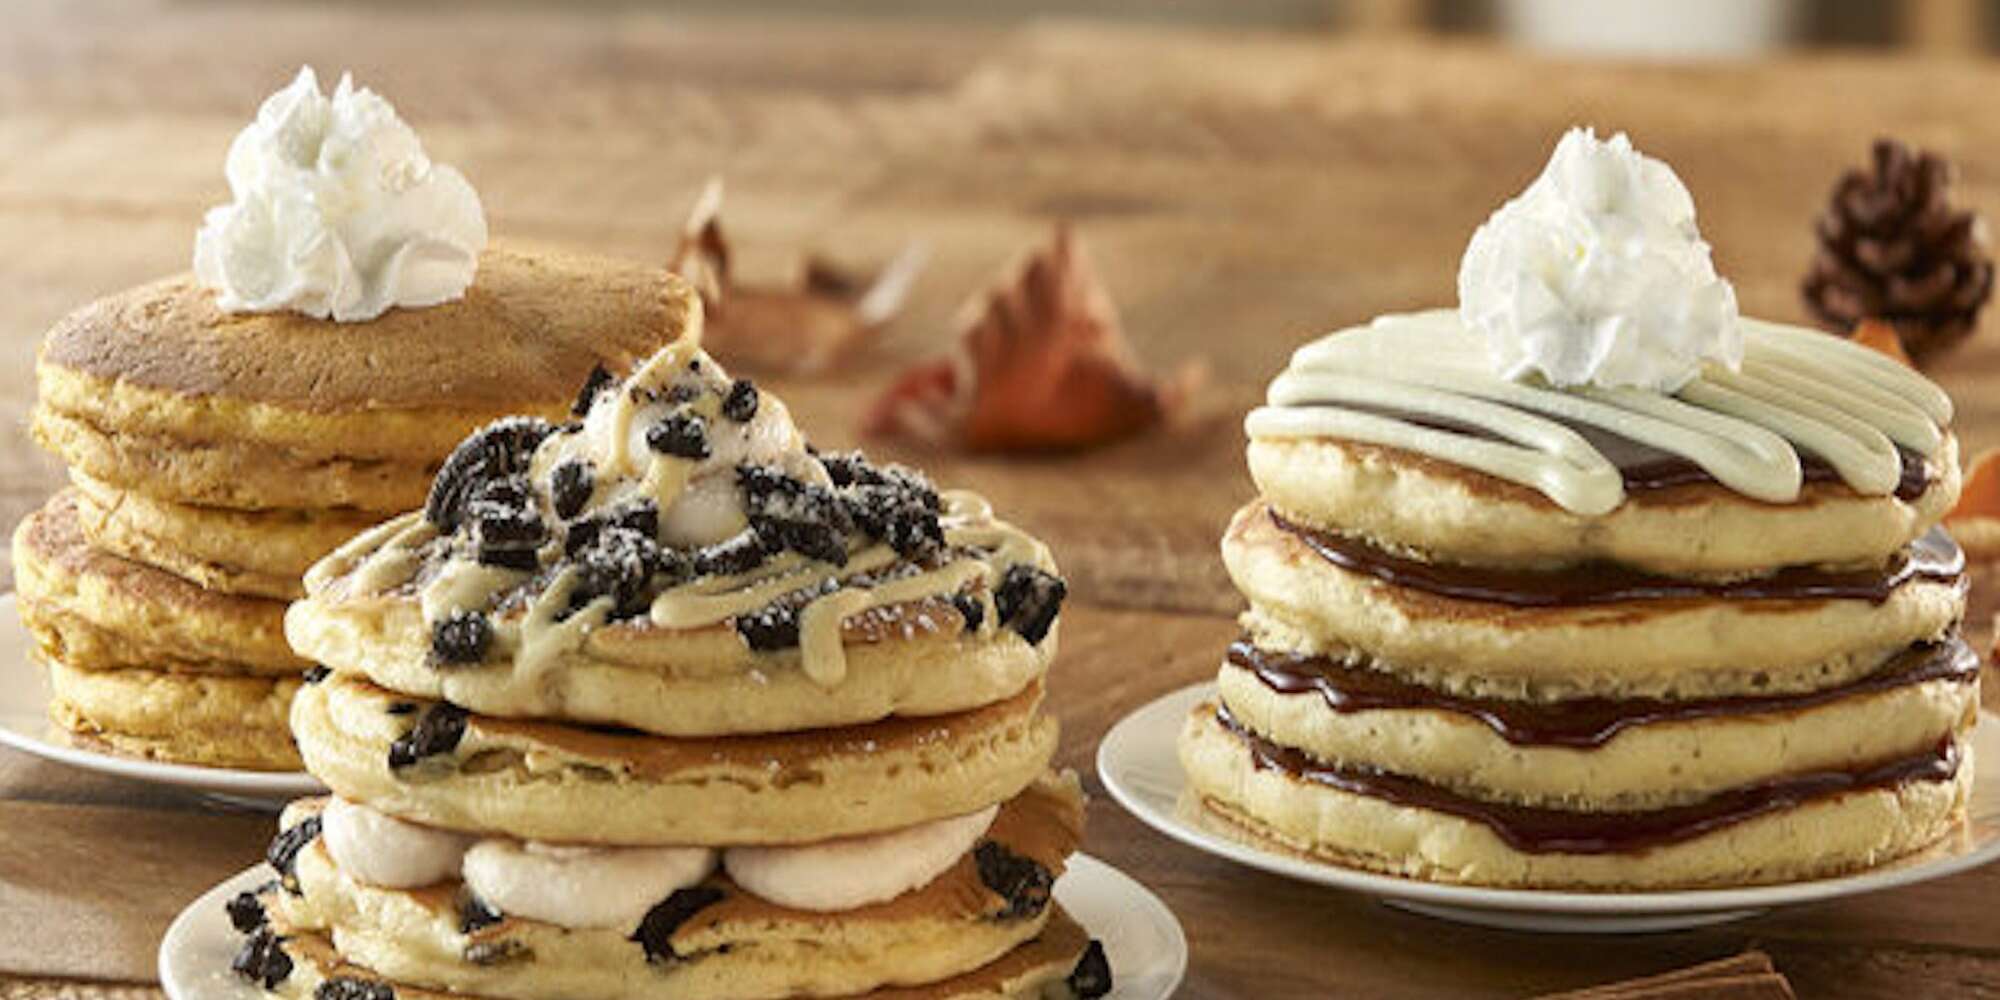 IHOP Just Shared Its Fall Menu—and We See Pumpkin Spice Pancakes